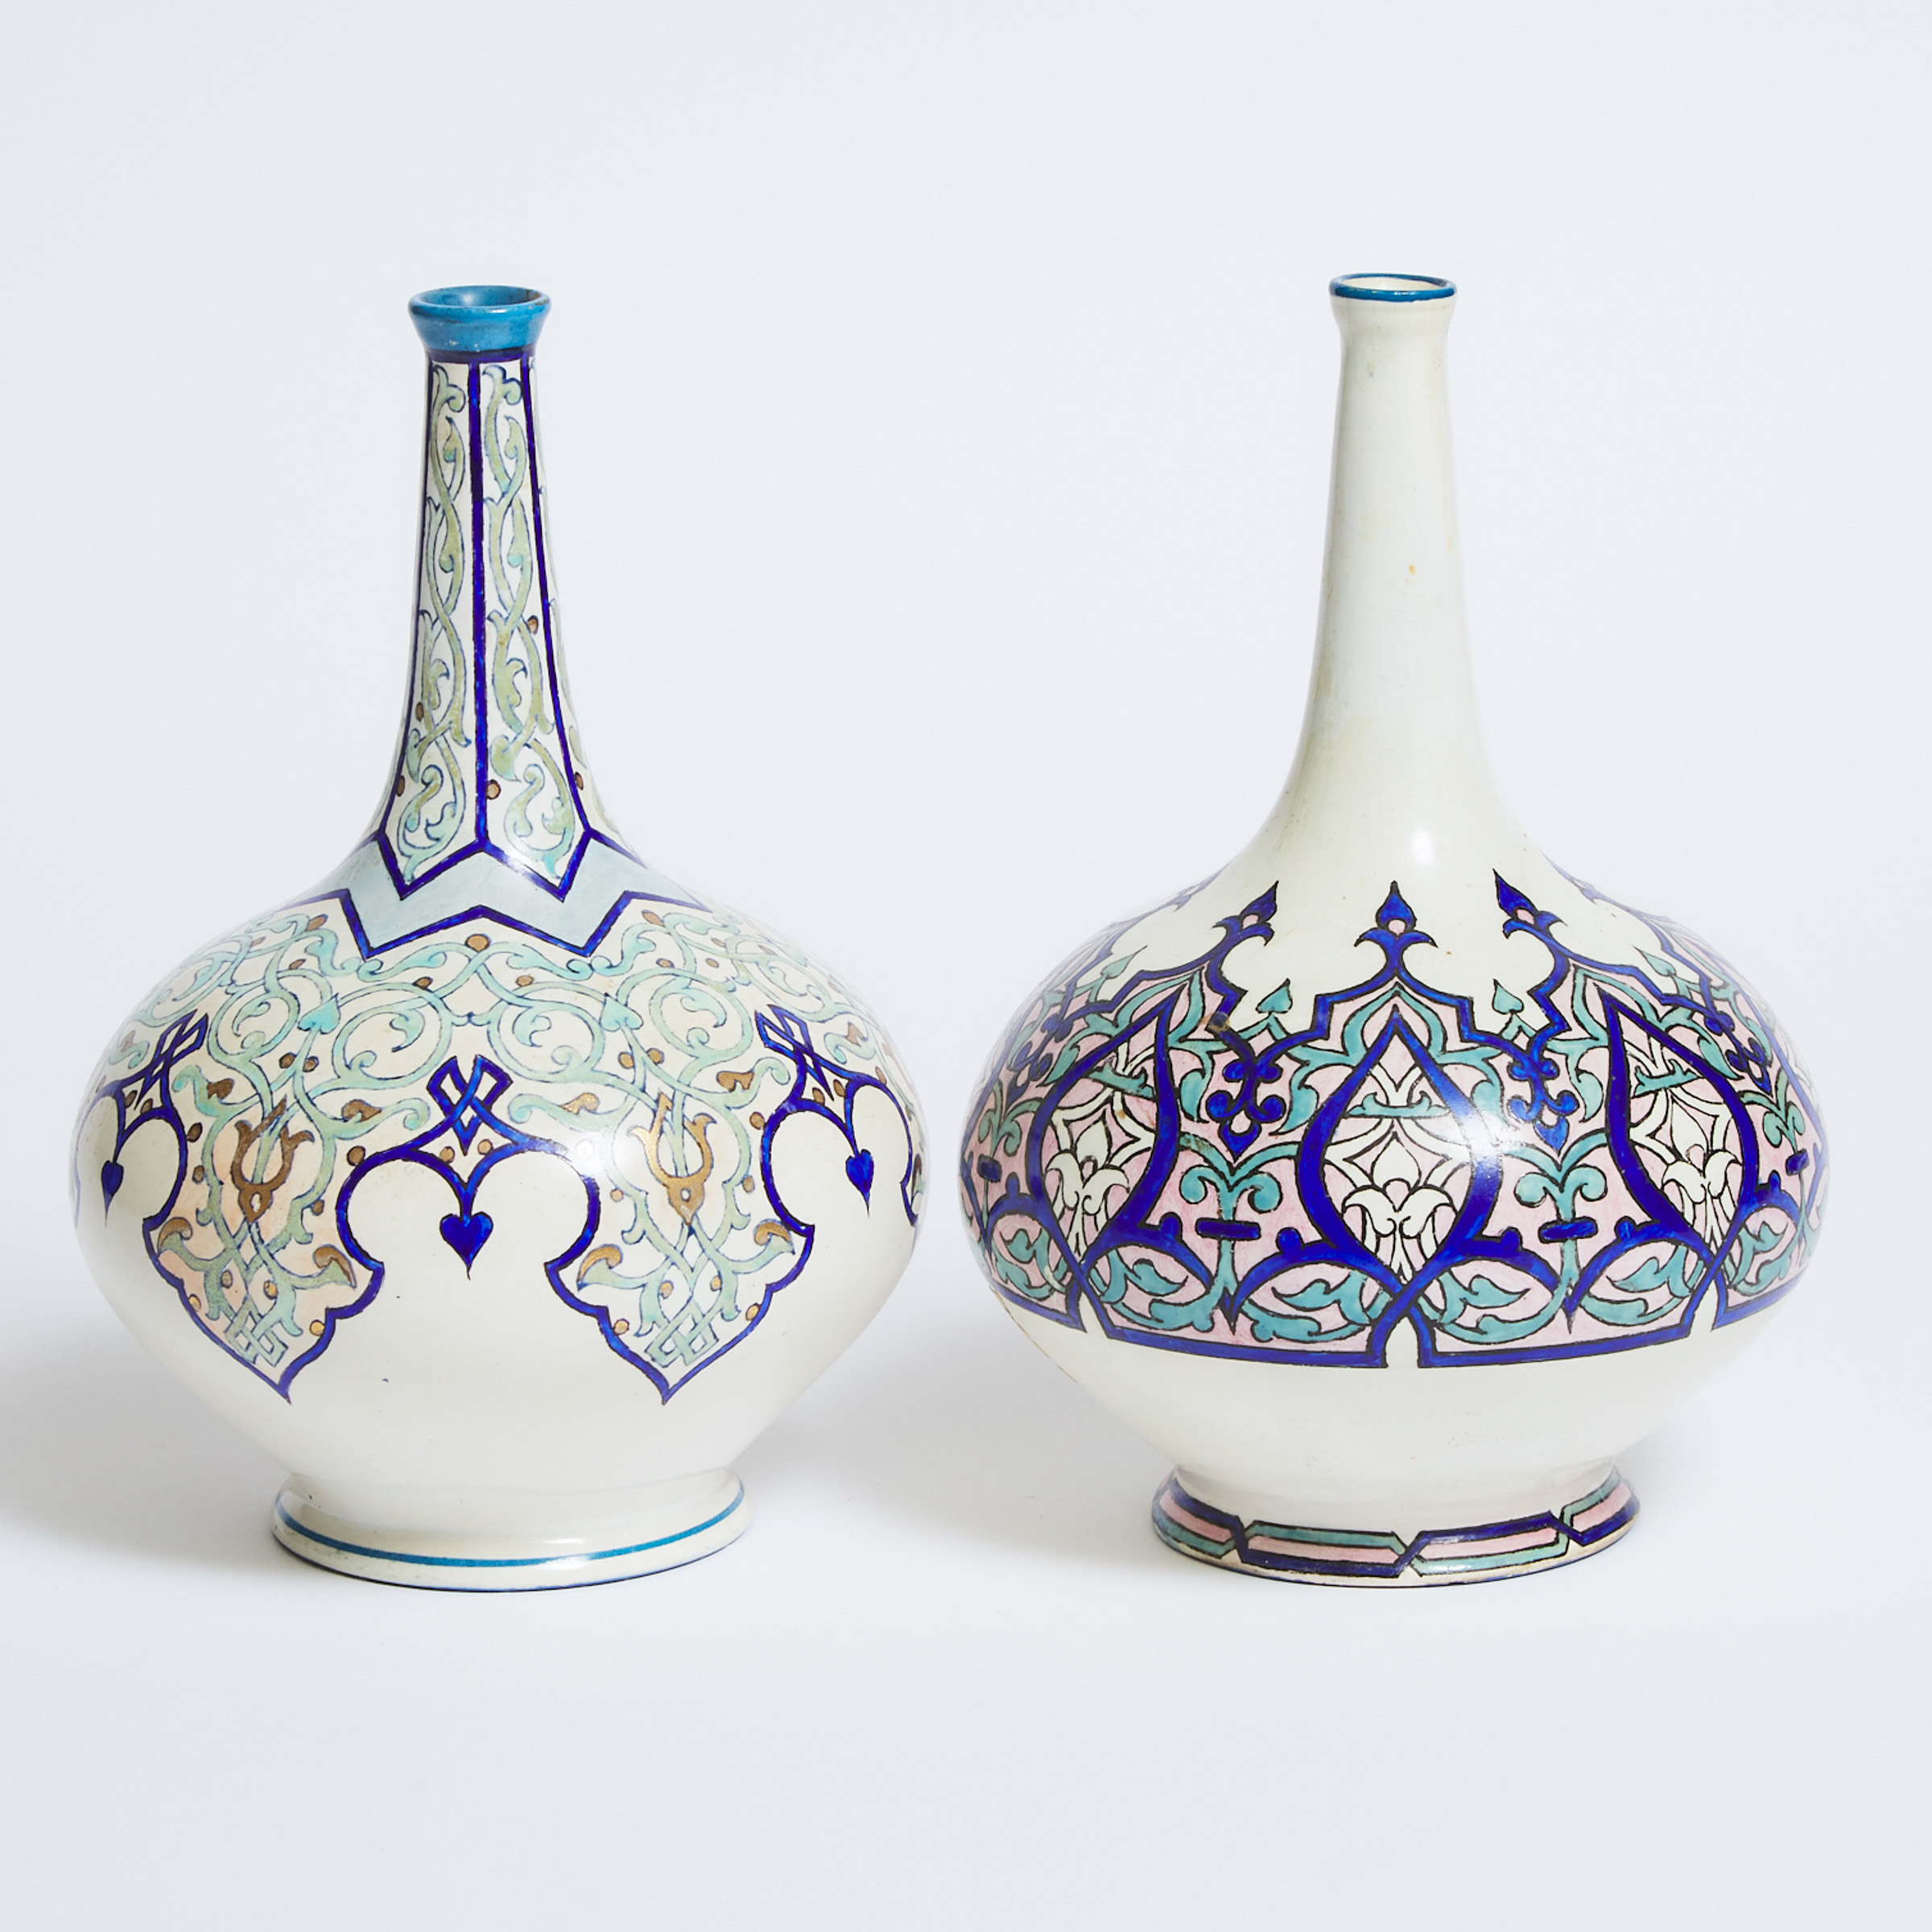 Pair of English Earthenware Persian-Style